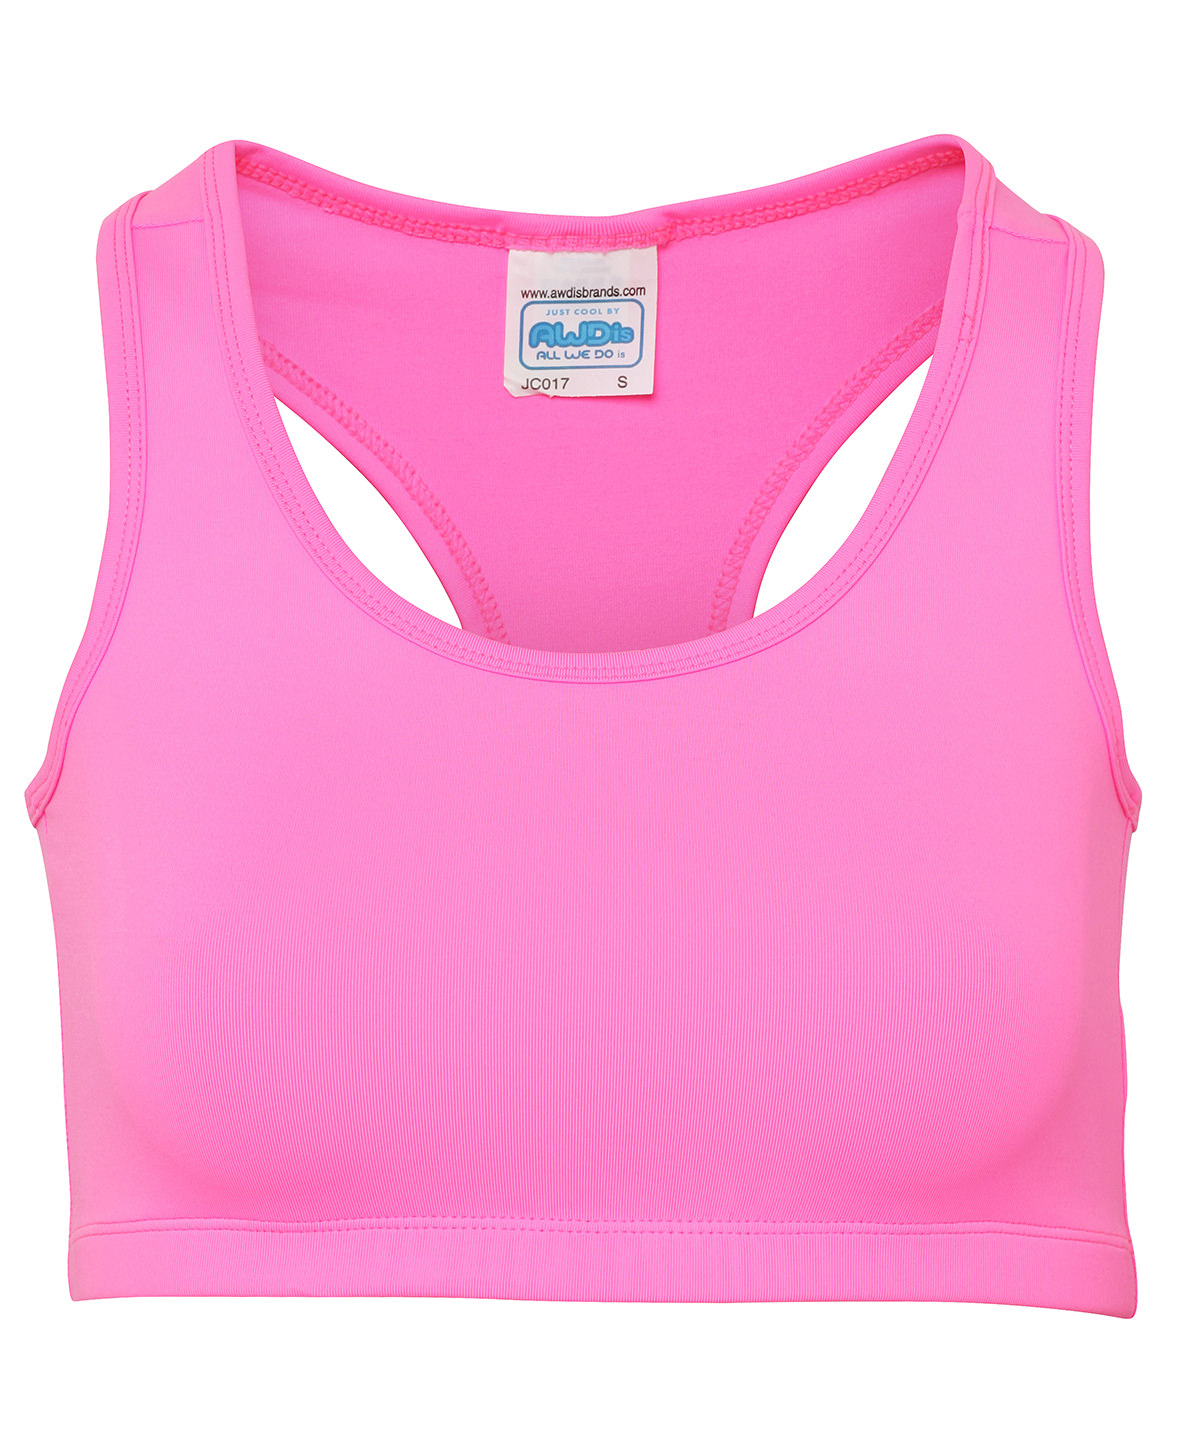 Womens Cool Sports Crop Top Electric Pink Size Large